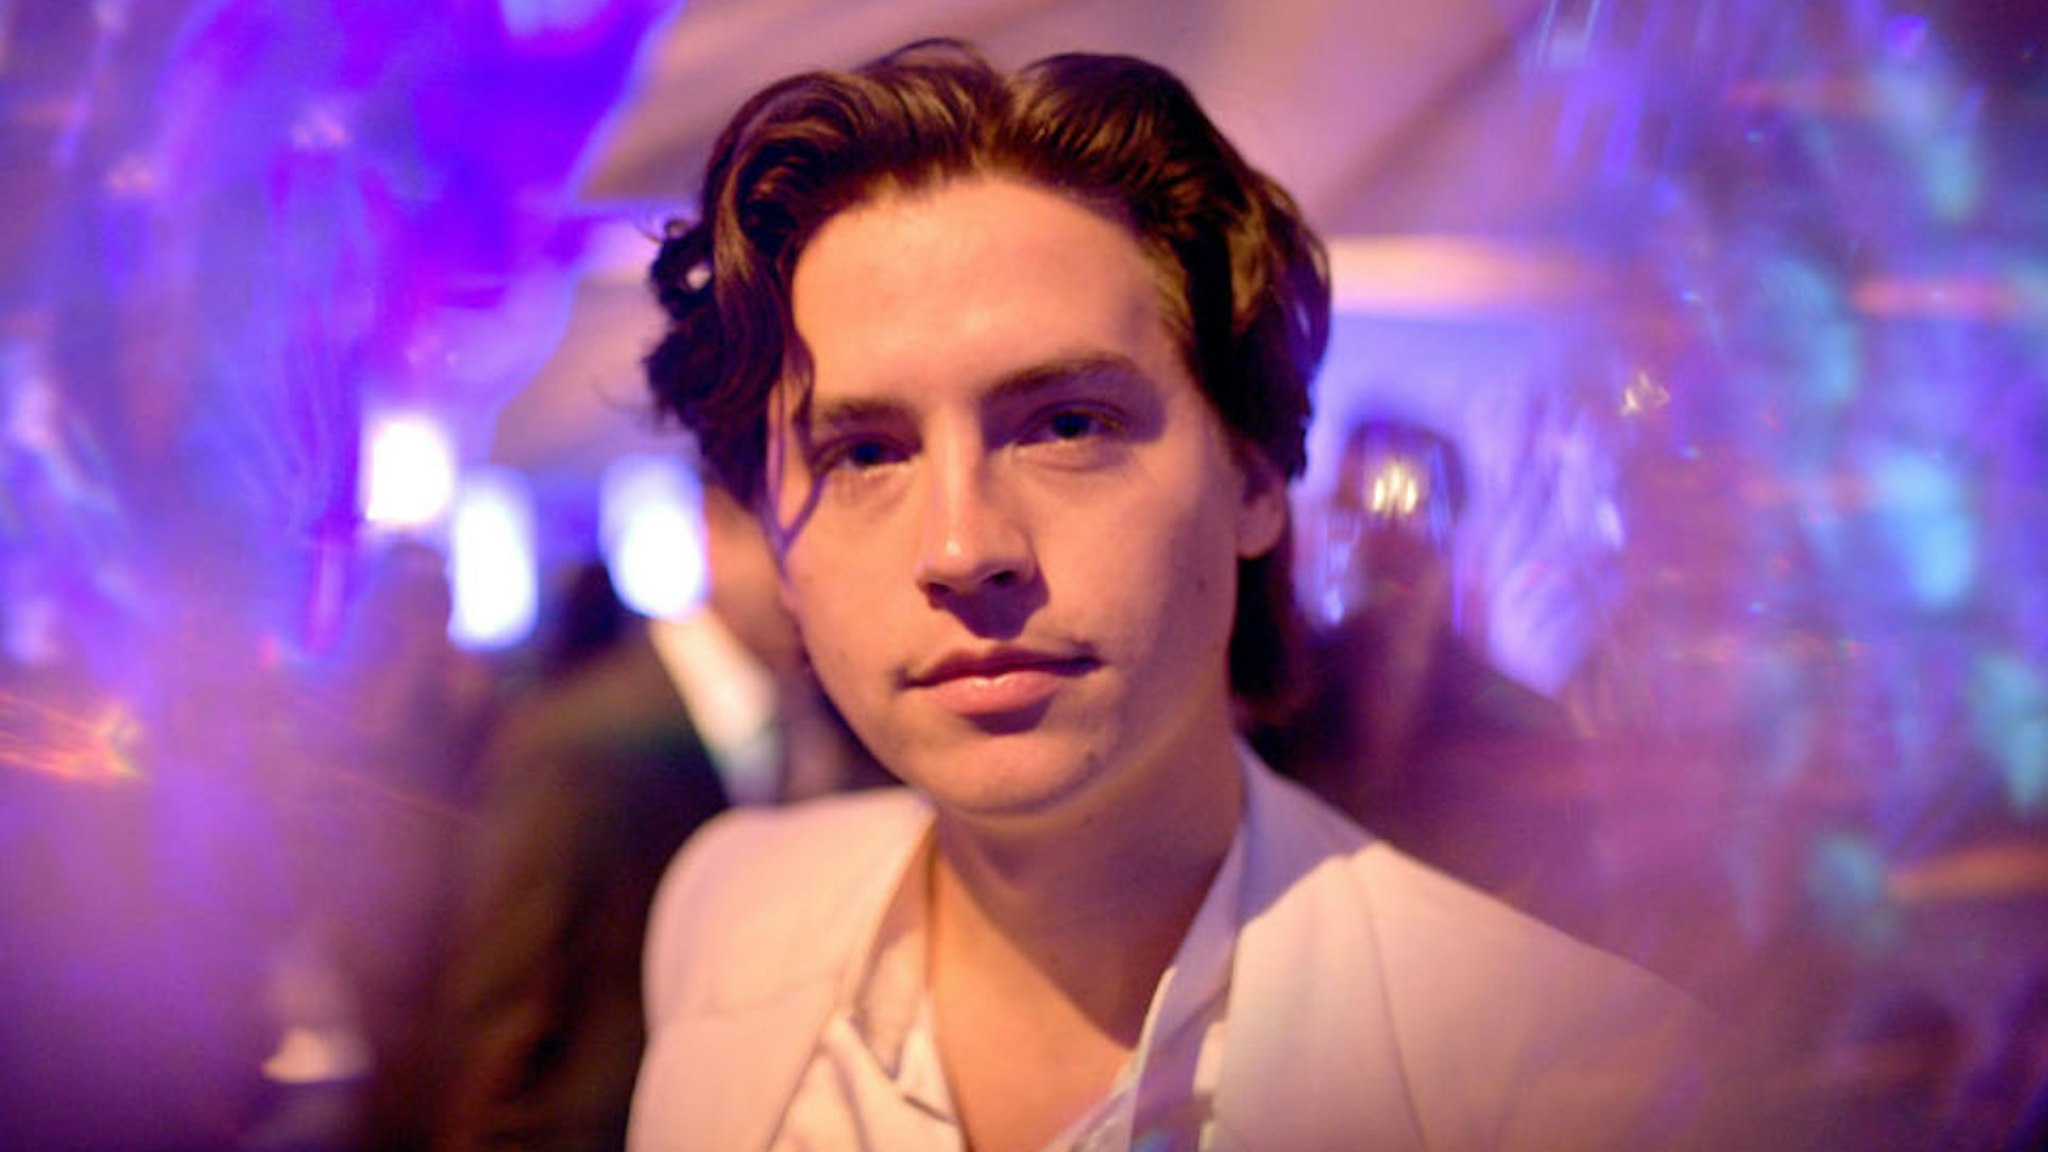 Cole Sprouse attends the 2020 Vanity Fair Oscar Party hosted by Radhika Jones at Wallis Annenberg Center for the Performing Arts on February 09, 2020 in Beverly Hills, California.